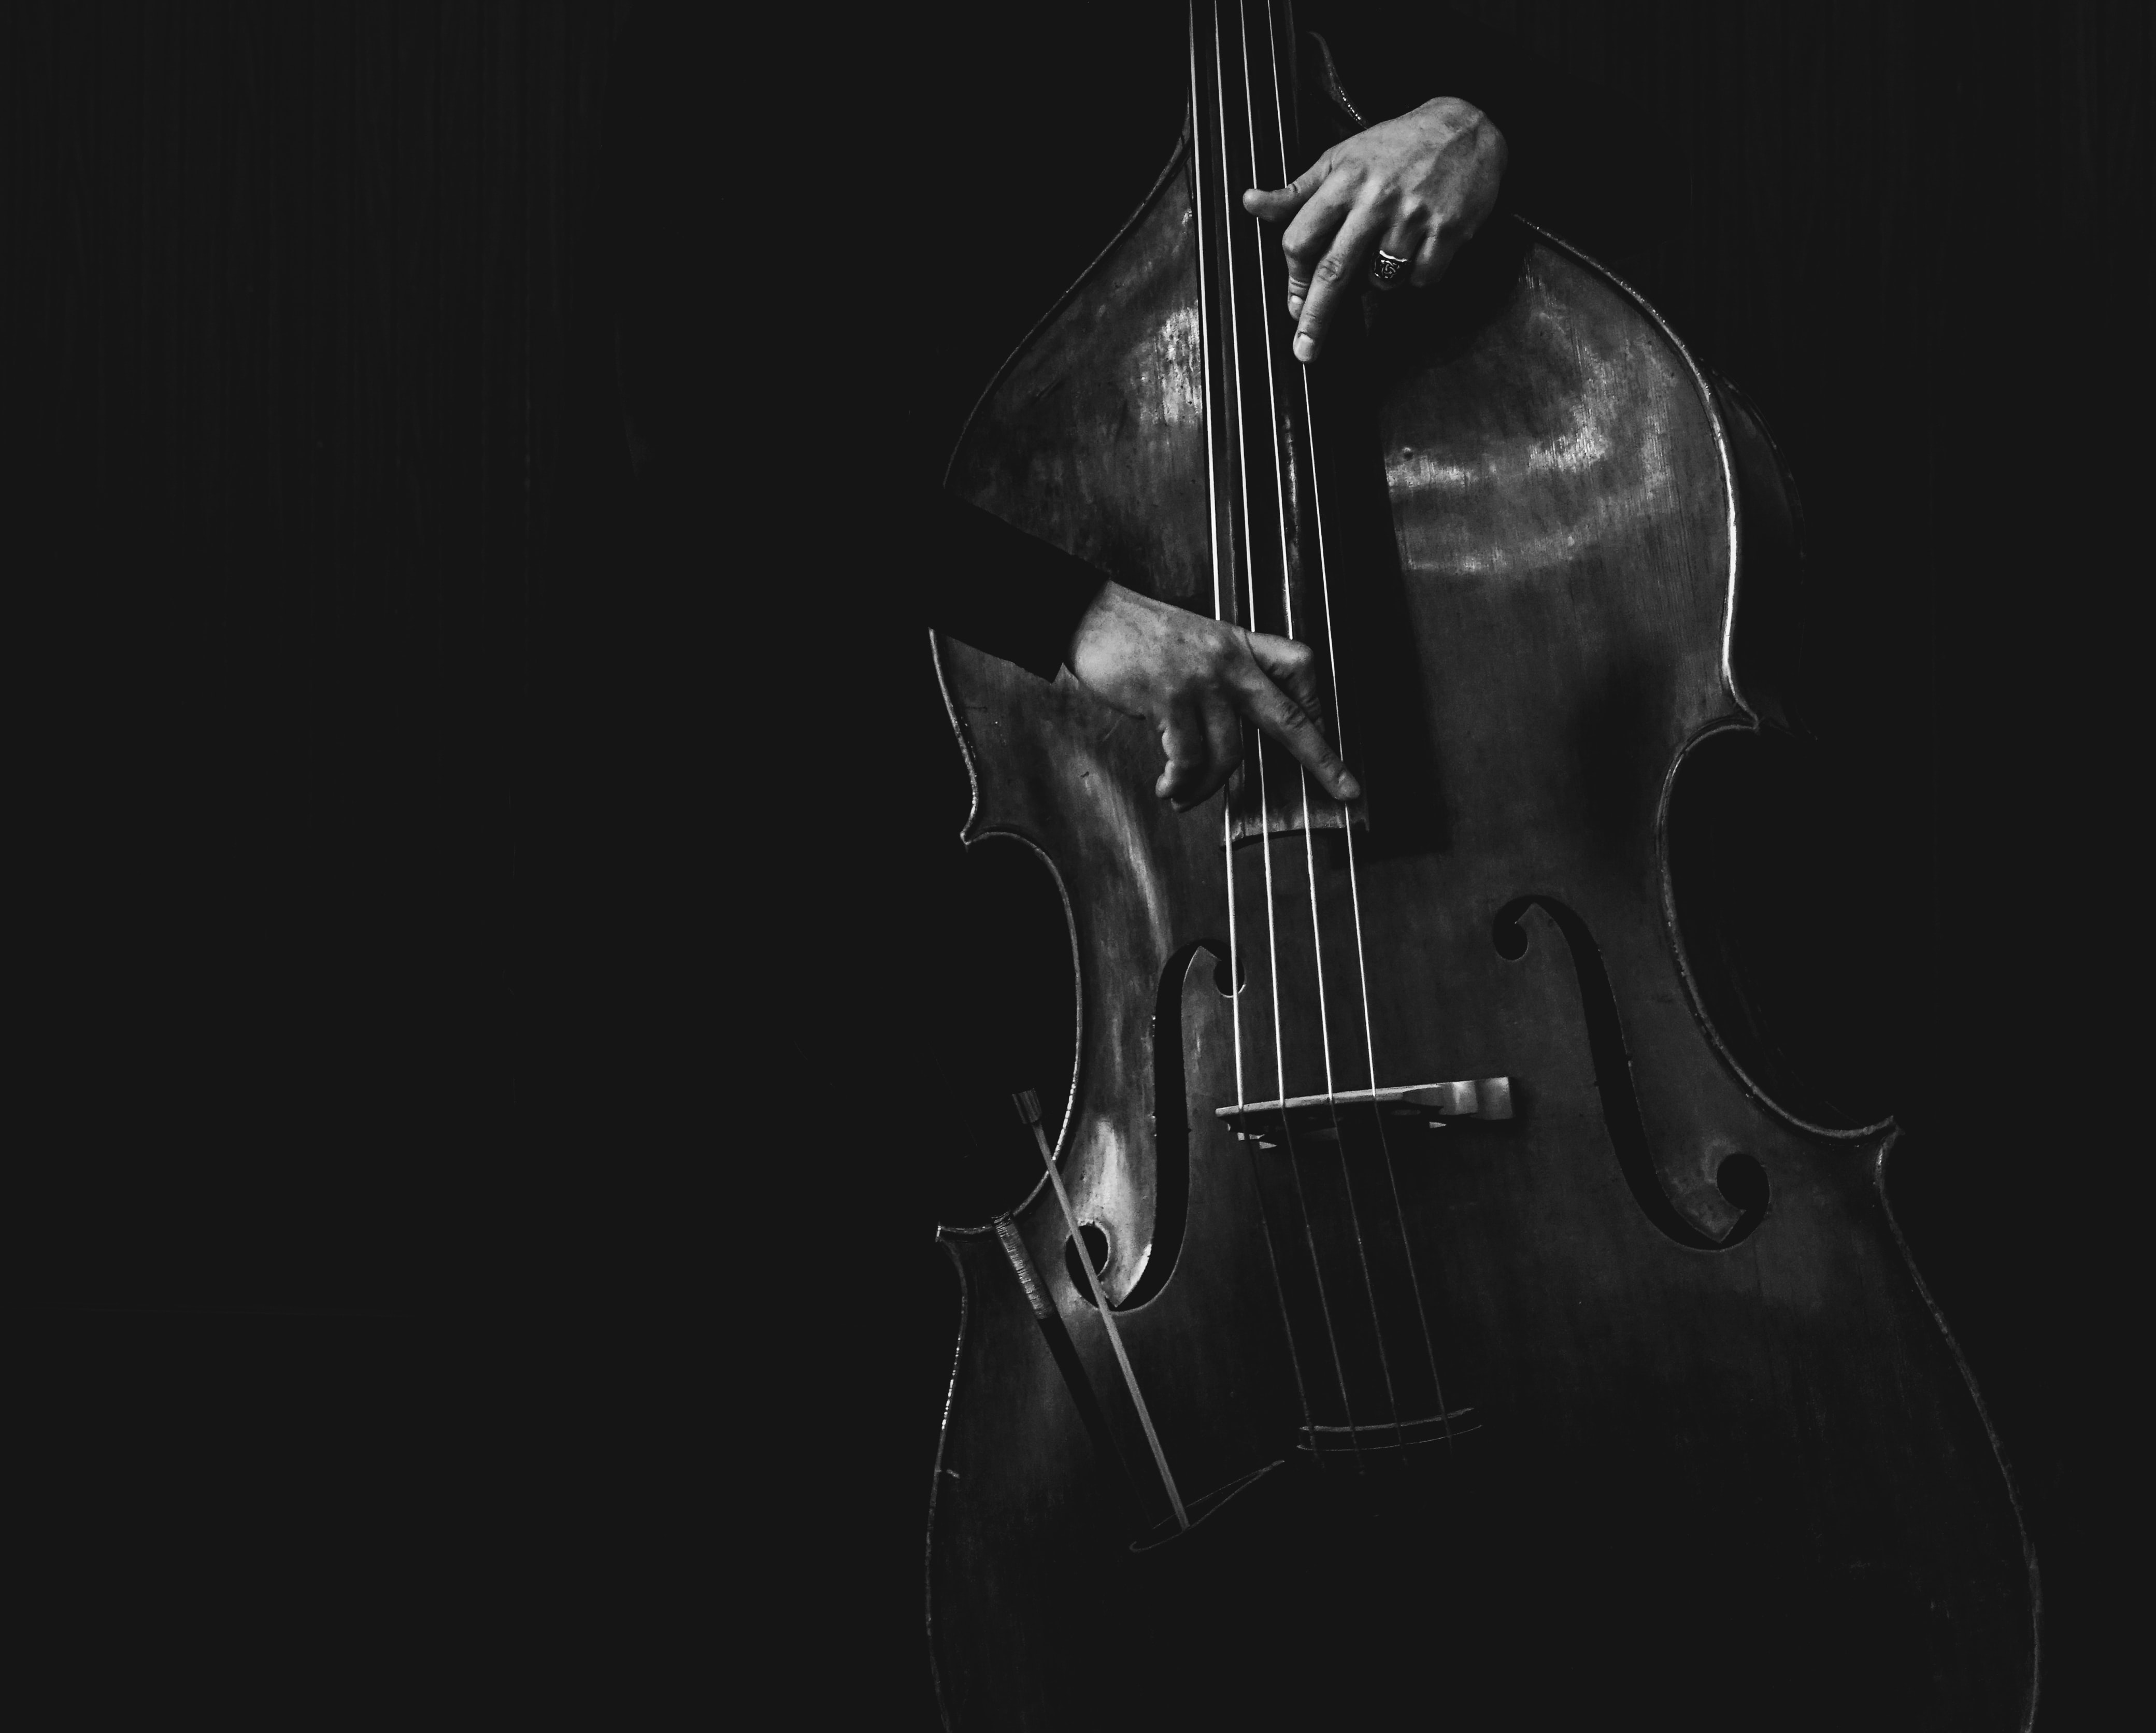 A standup bass player with their instrument